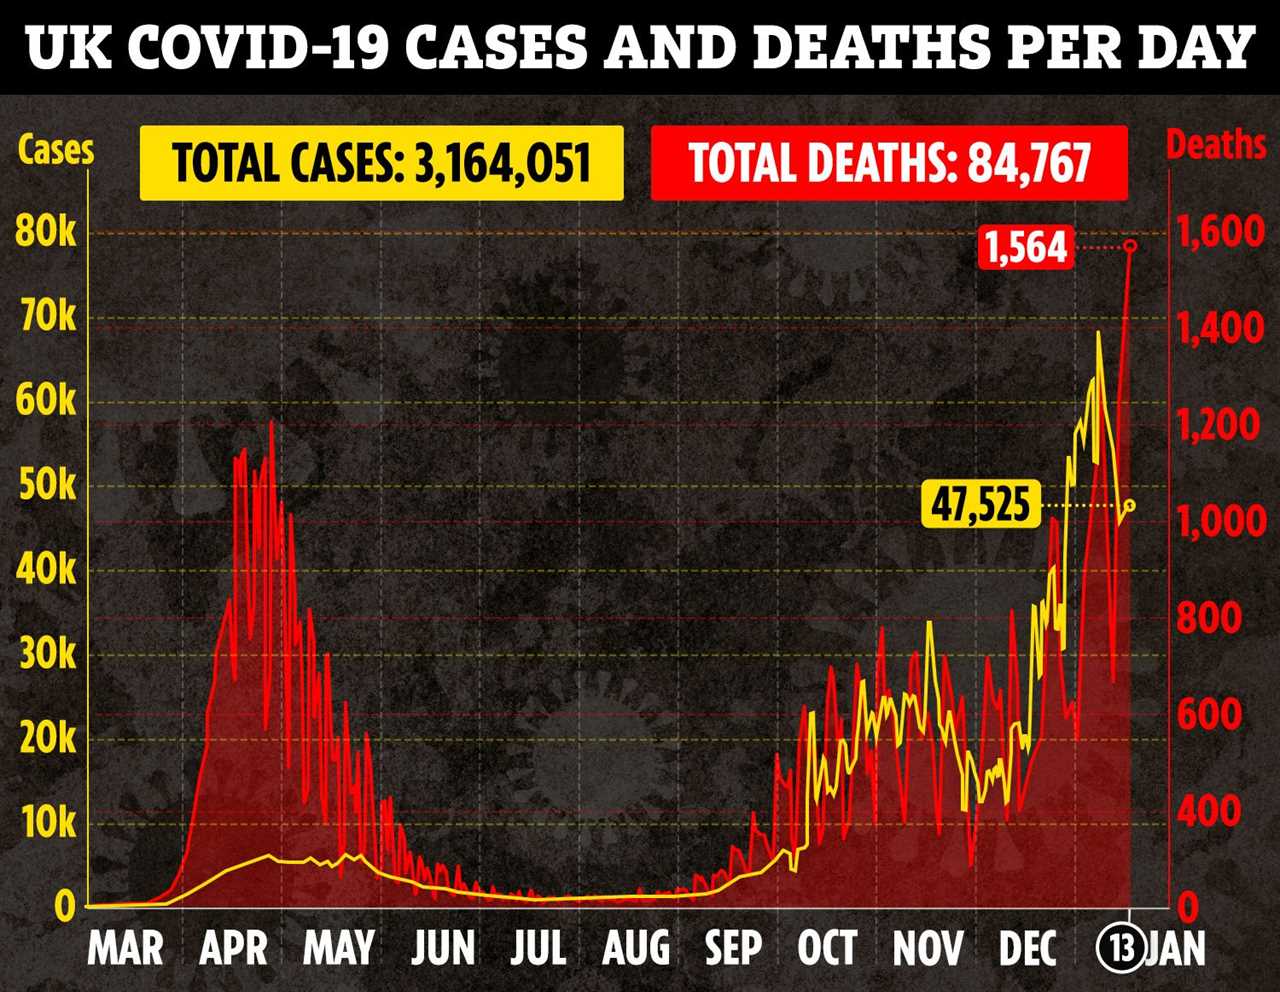 It’s hard not to despair at the daily Covid death toll – but there’s glimmers of hope